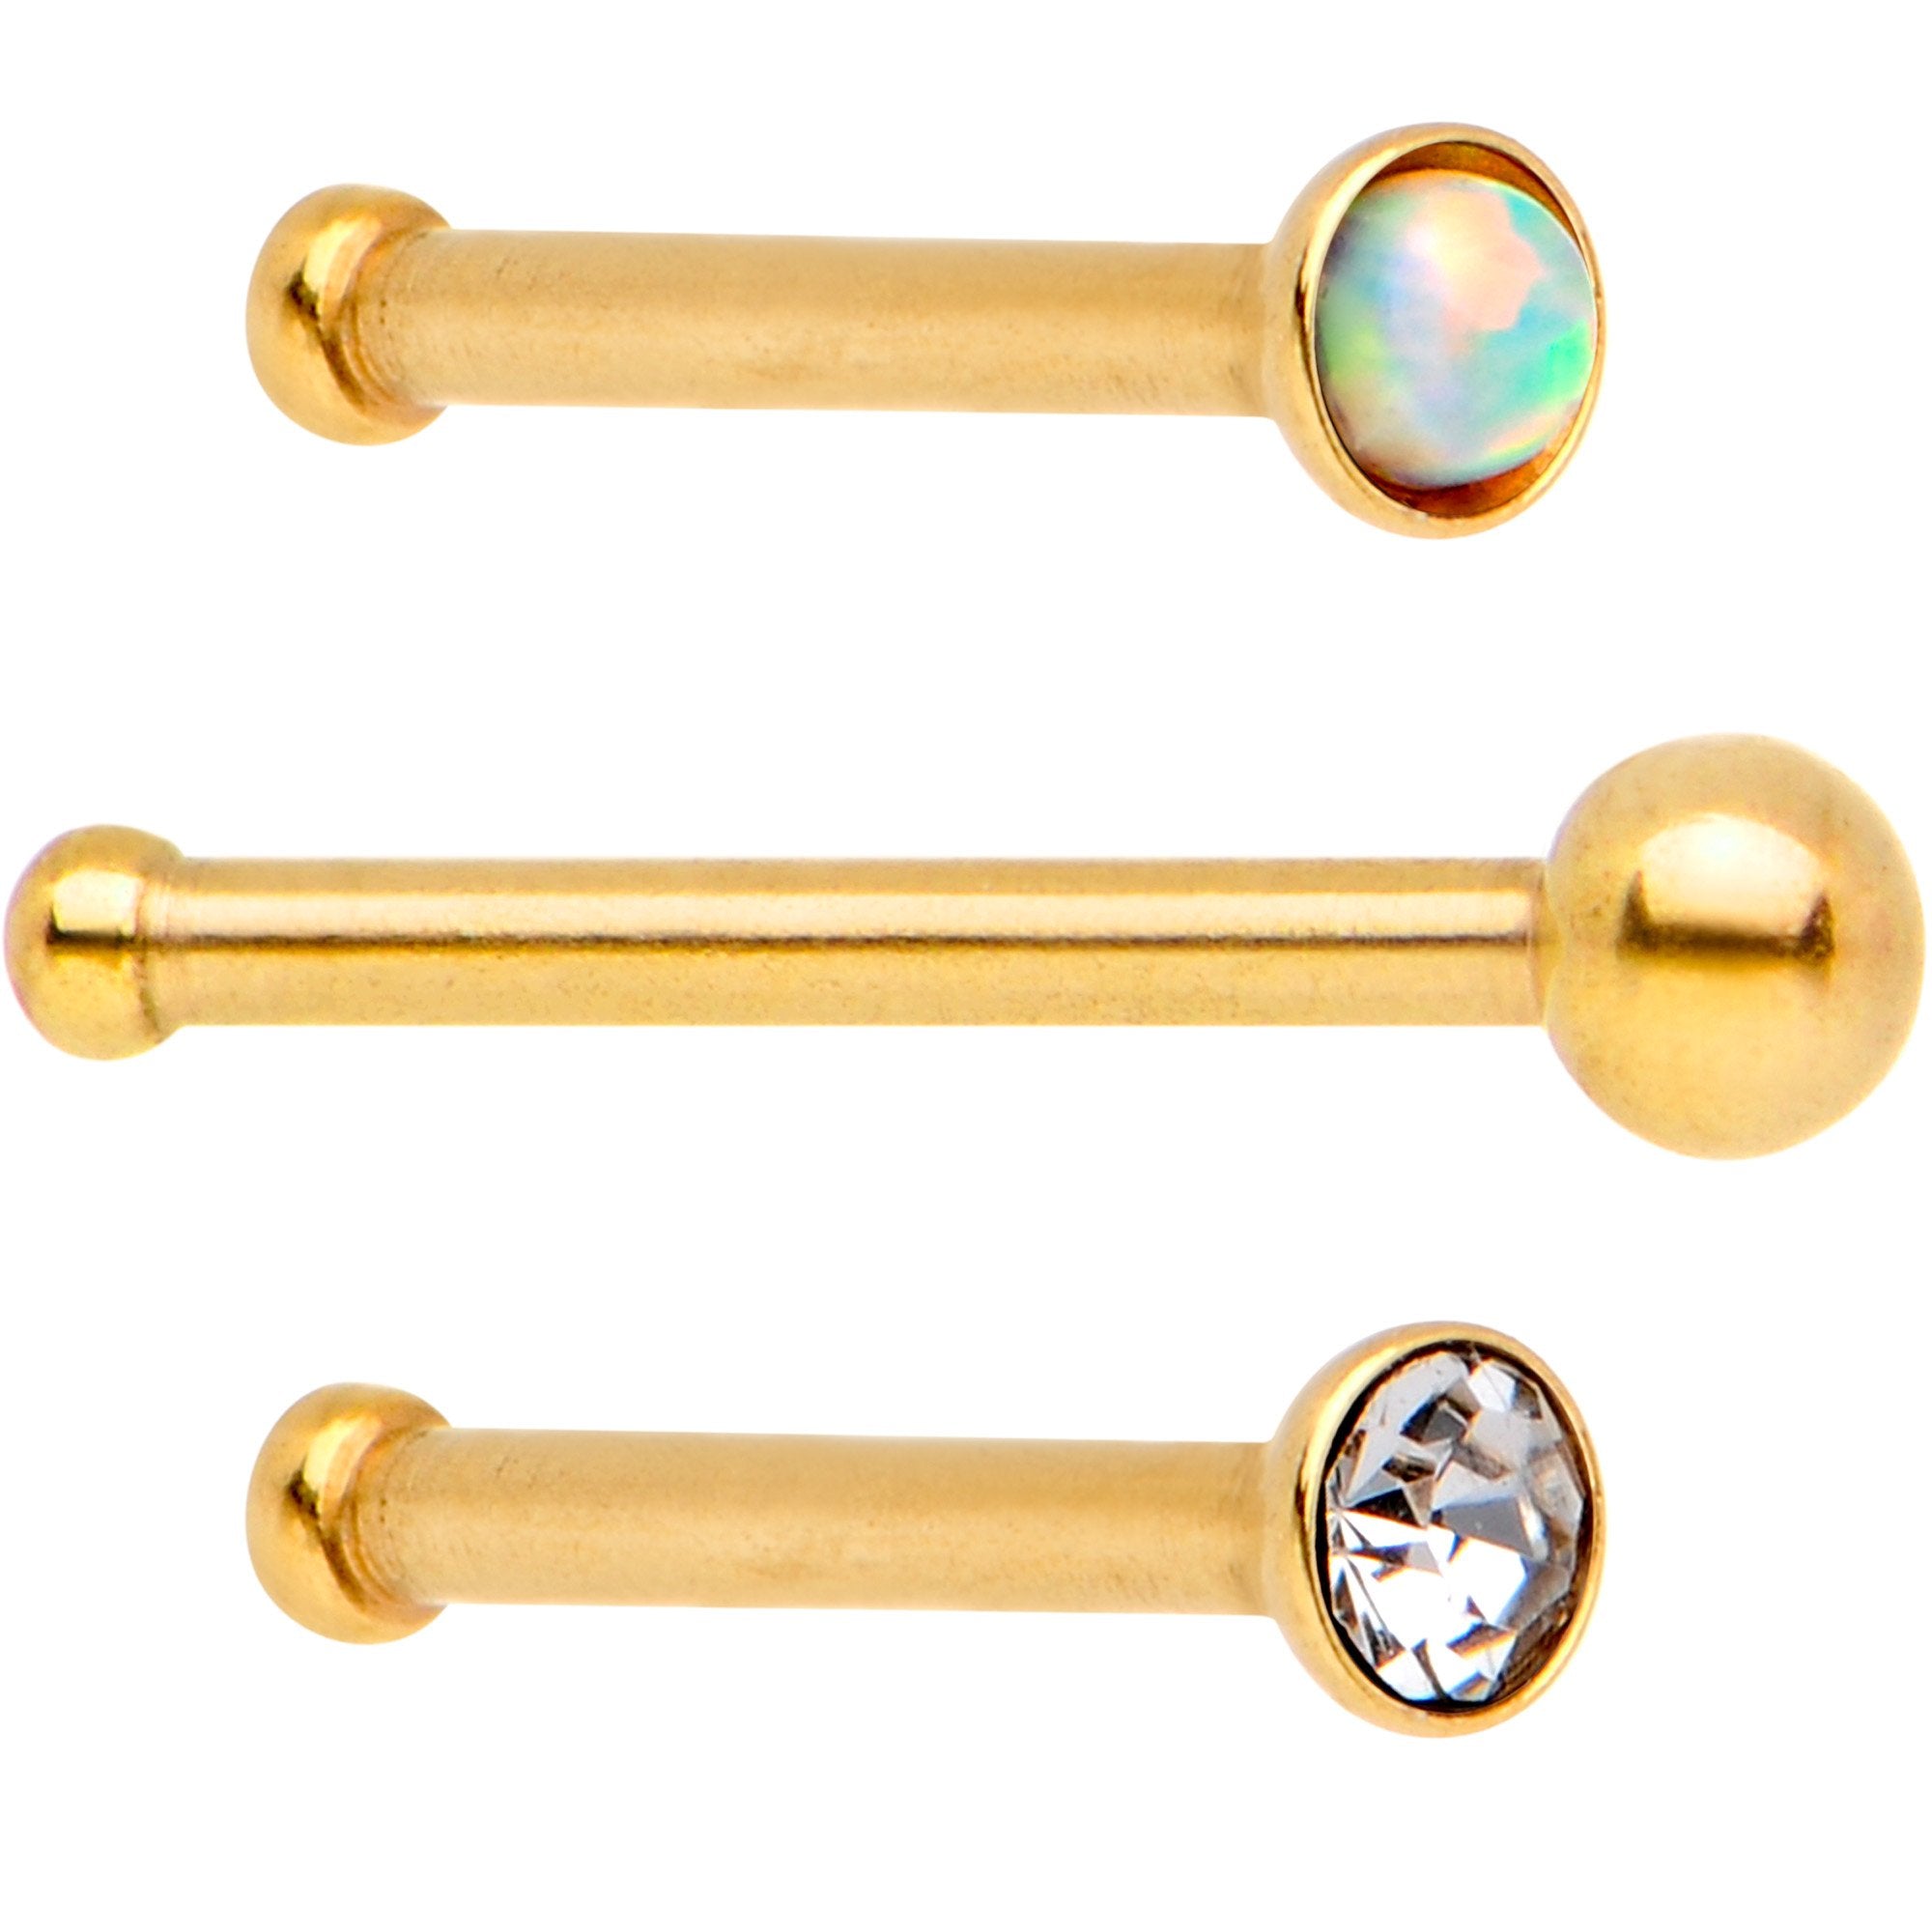 Variety Belle of the Ball Gold PVD Nose Bone 3 Pack Set